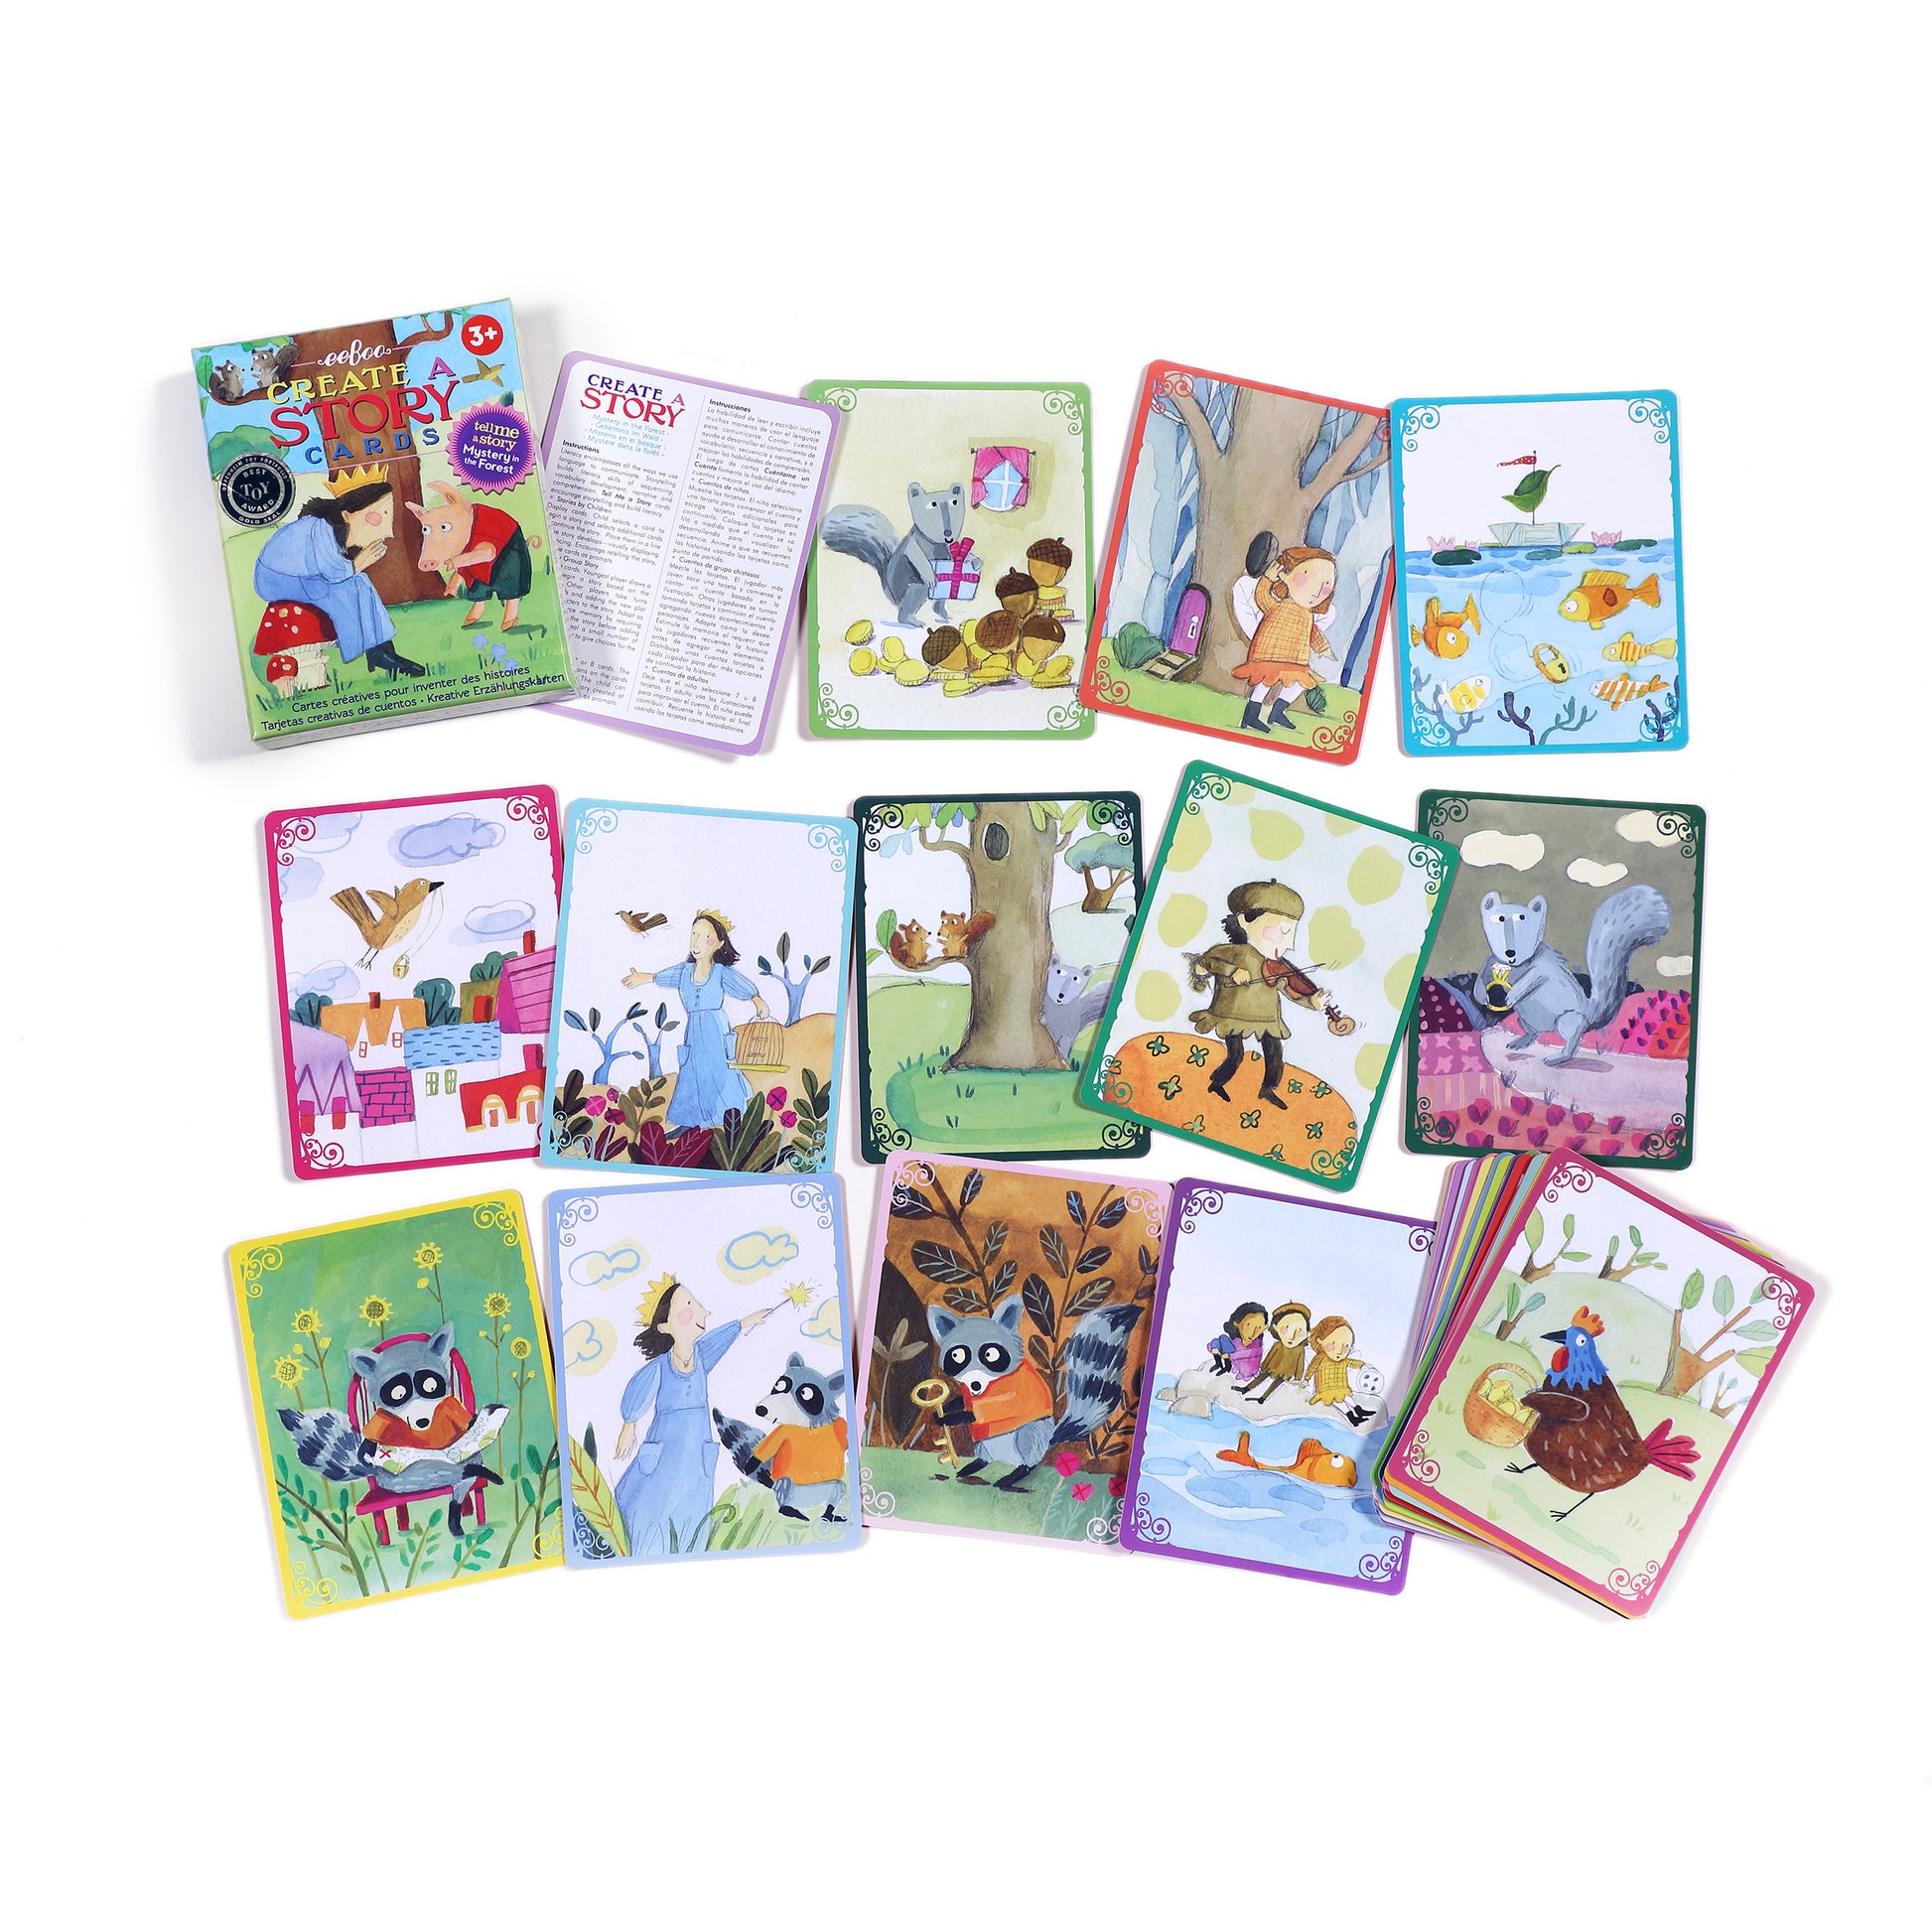 Mystery in the Forest Award Winning Create and Tell Me A Story Cards for Kids Ages 3+